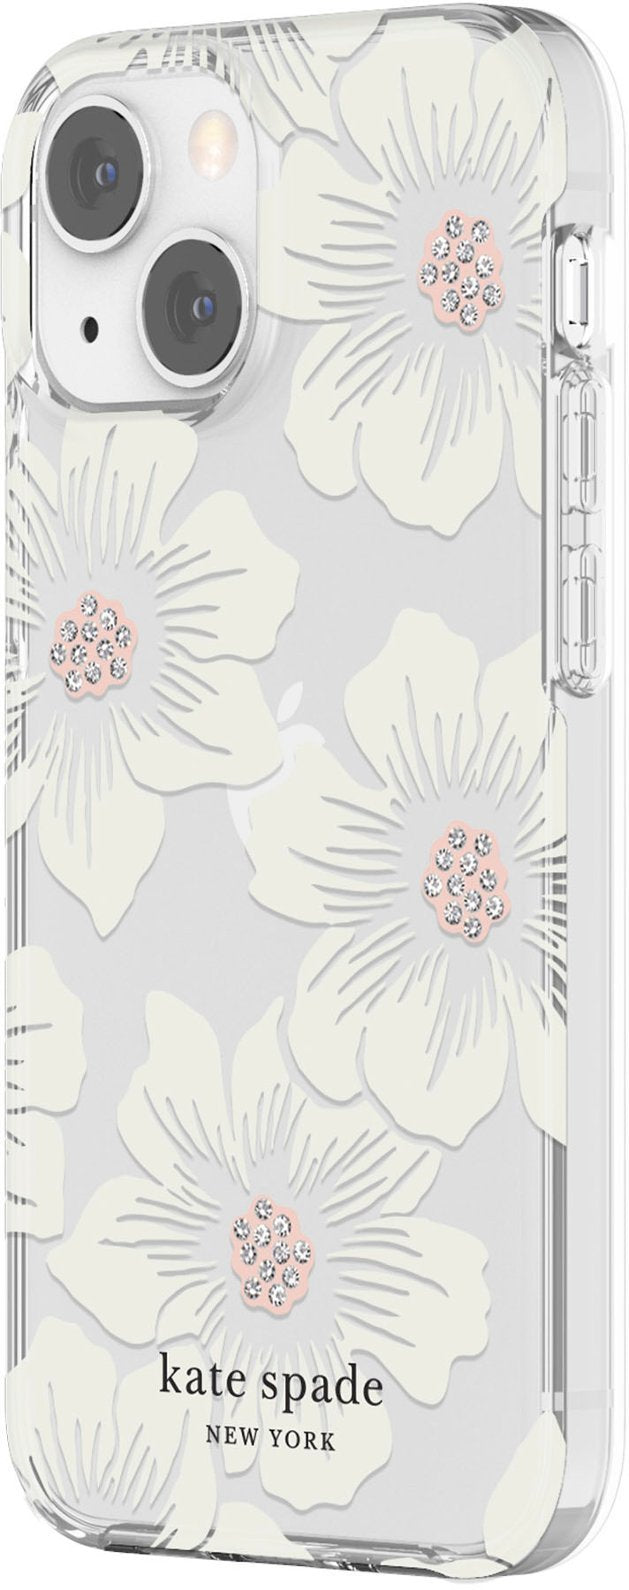 kate spade new york - KSIPH-187-HHCCS Protective Hardshell Case for iPhone 13 Mini and iPhone 12 Mini - Hollyhock